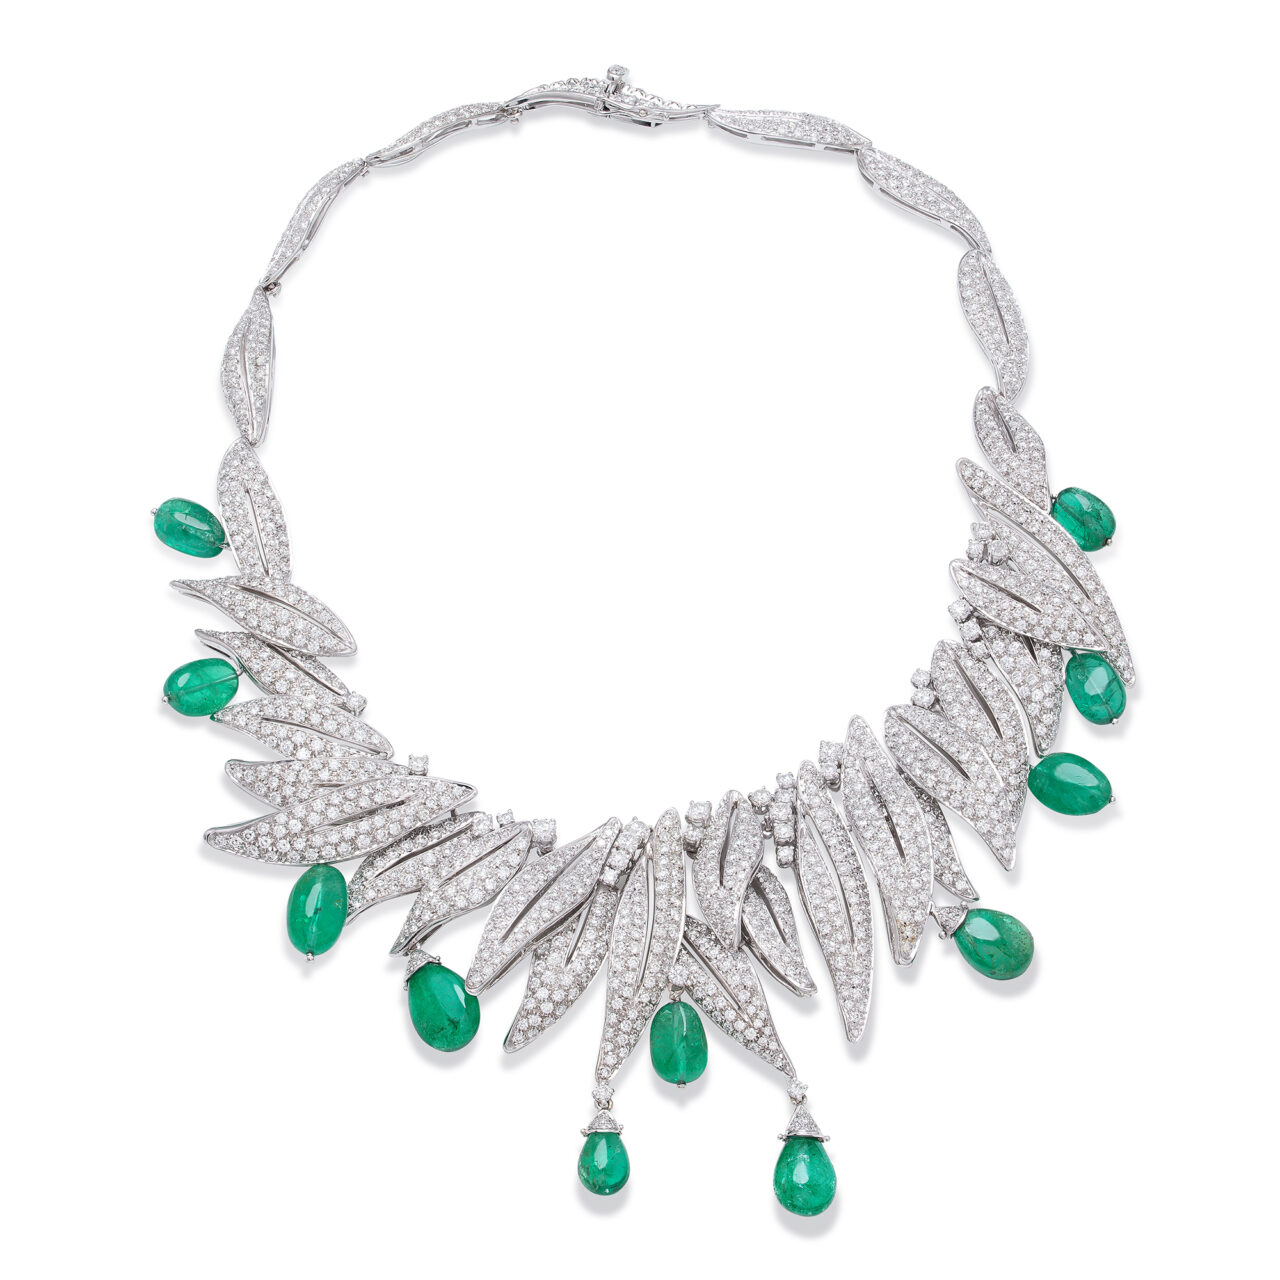 White gold necklace with diamonds and emeralds